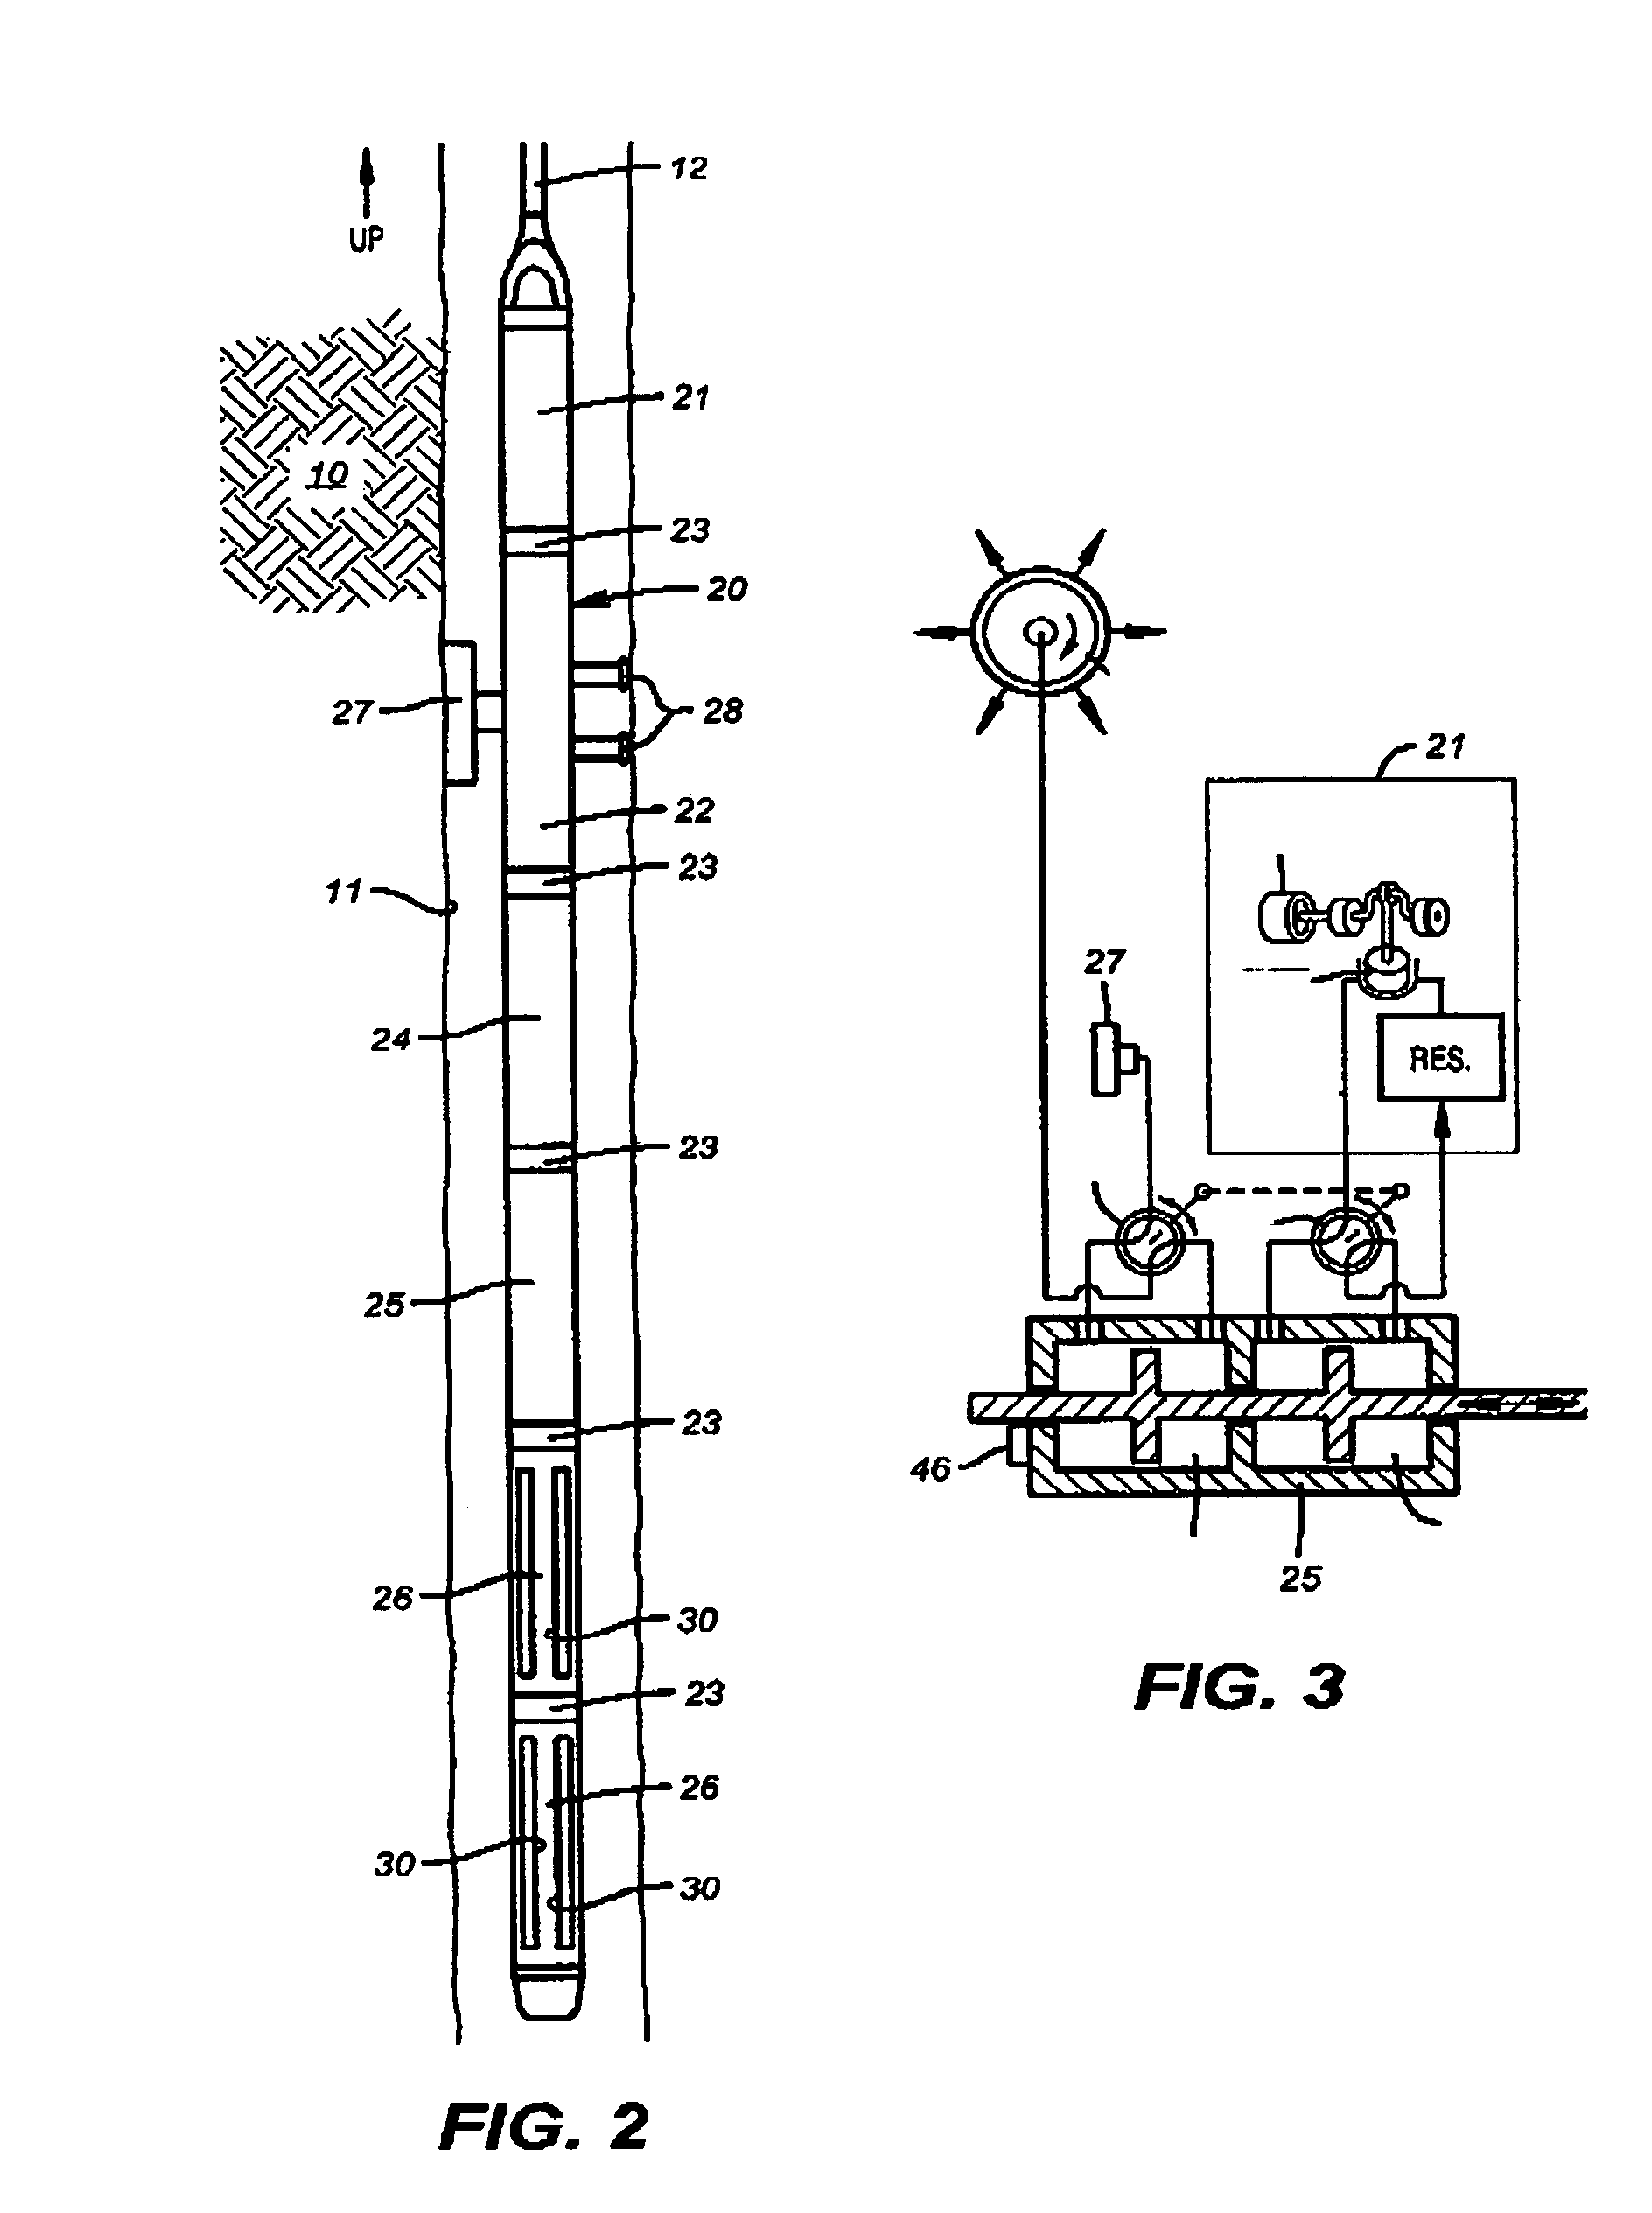 Method and apparatus for a tunable diode laser spectrometer for analysis of hydrocarbon samples